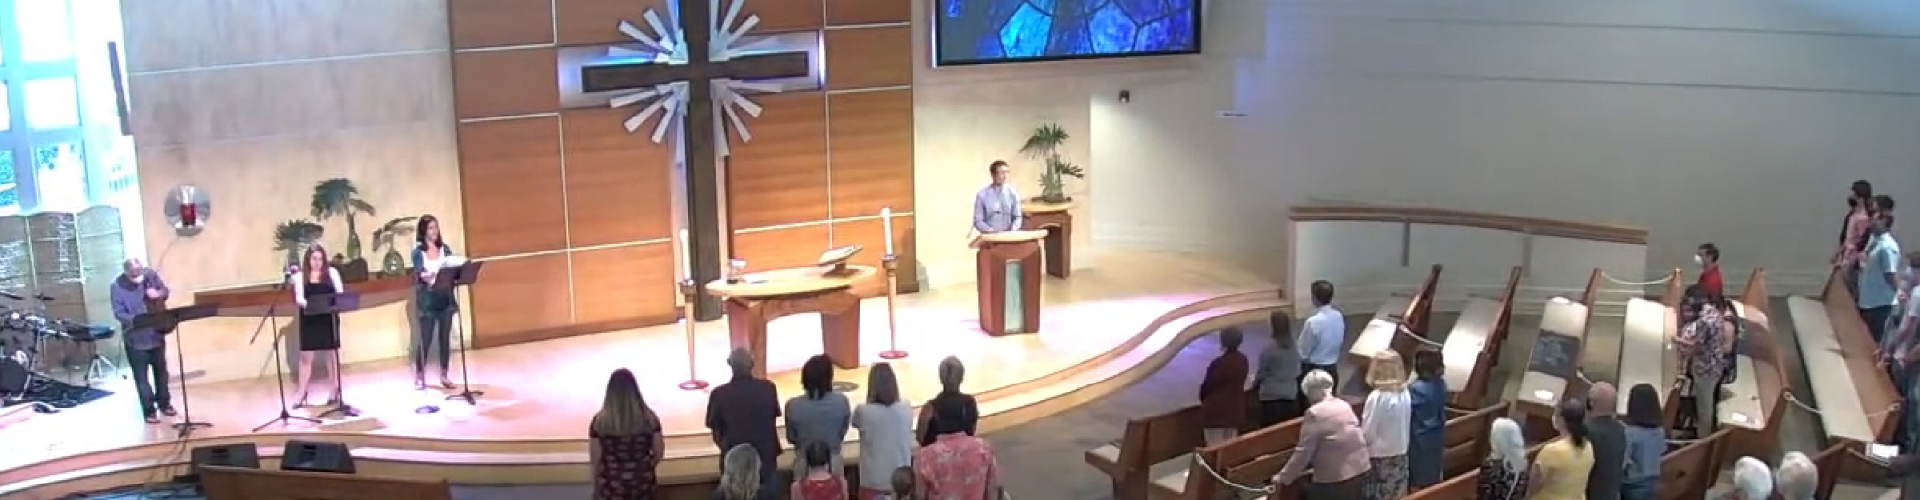 view of Sanctuary during worship service